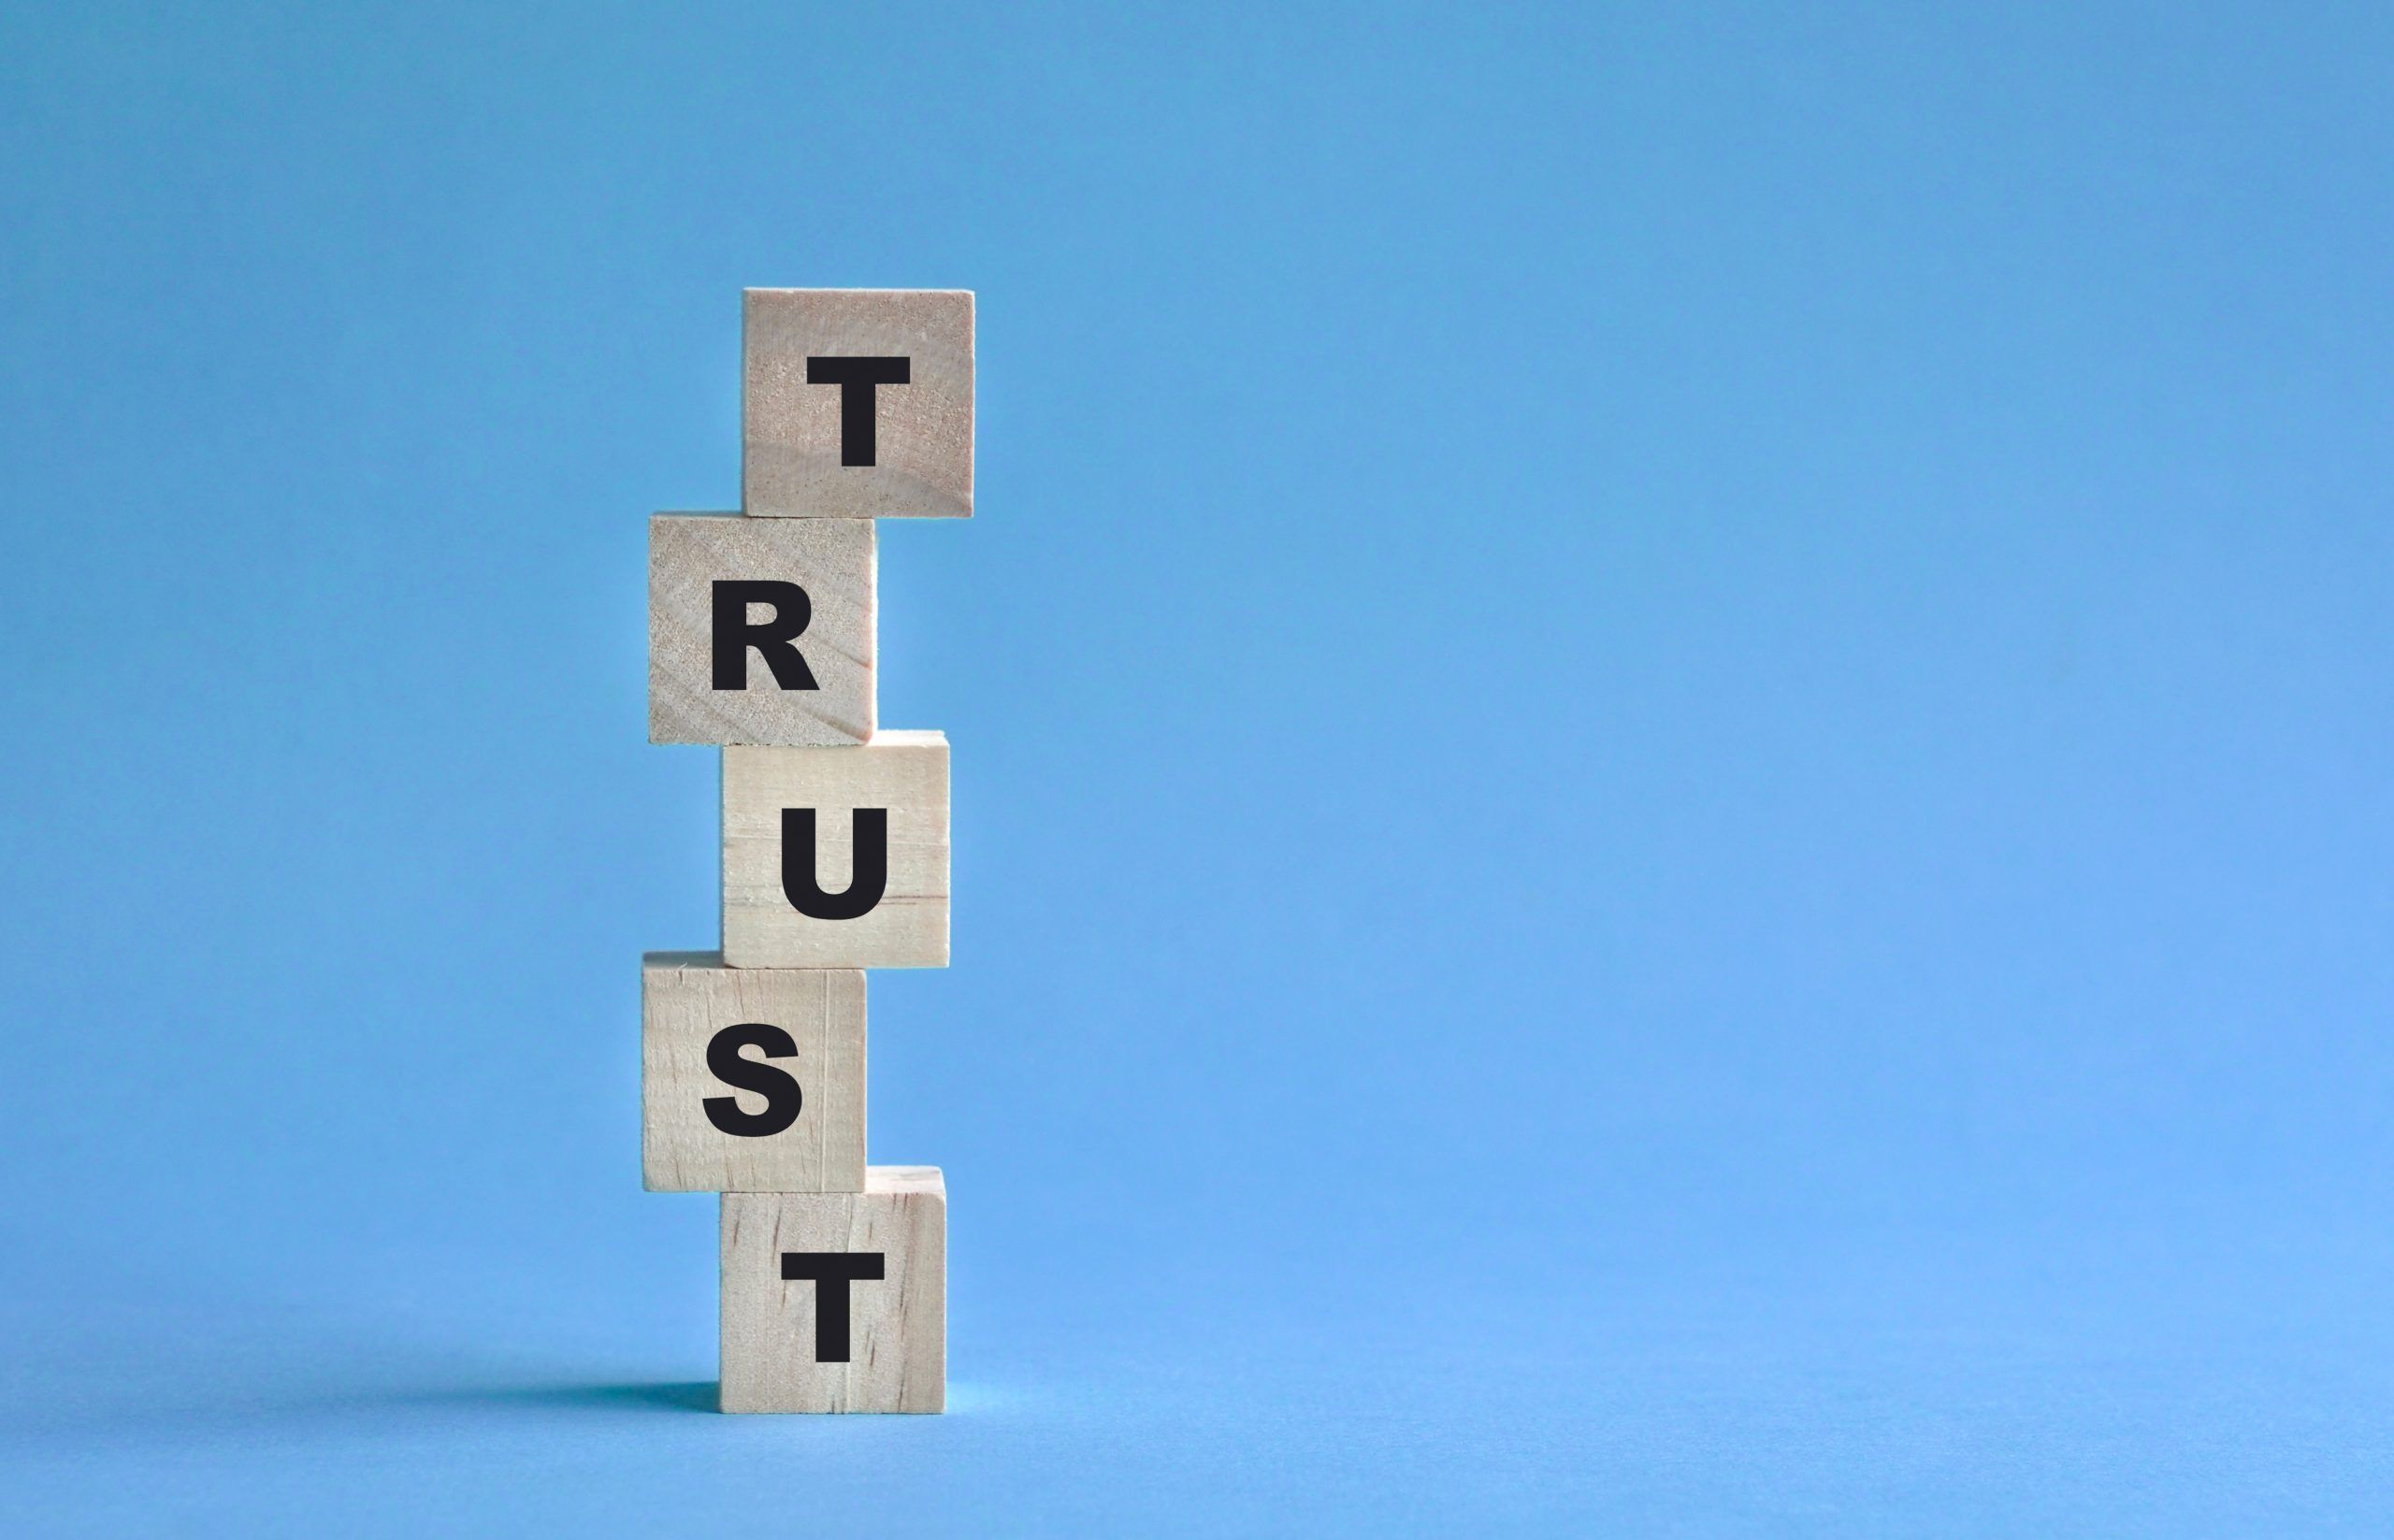 Building trust online: wooden building blocks that spell trust. The blocks are stacked on top of each other